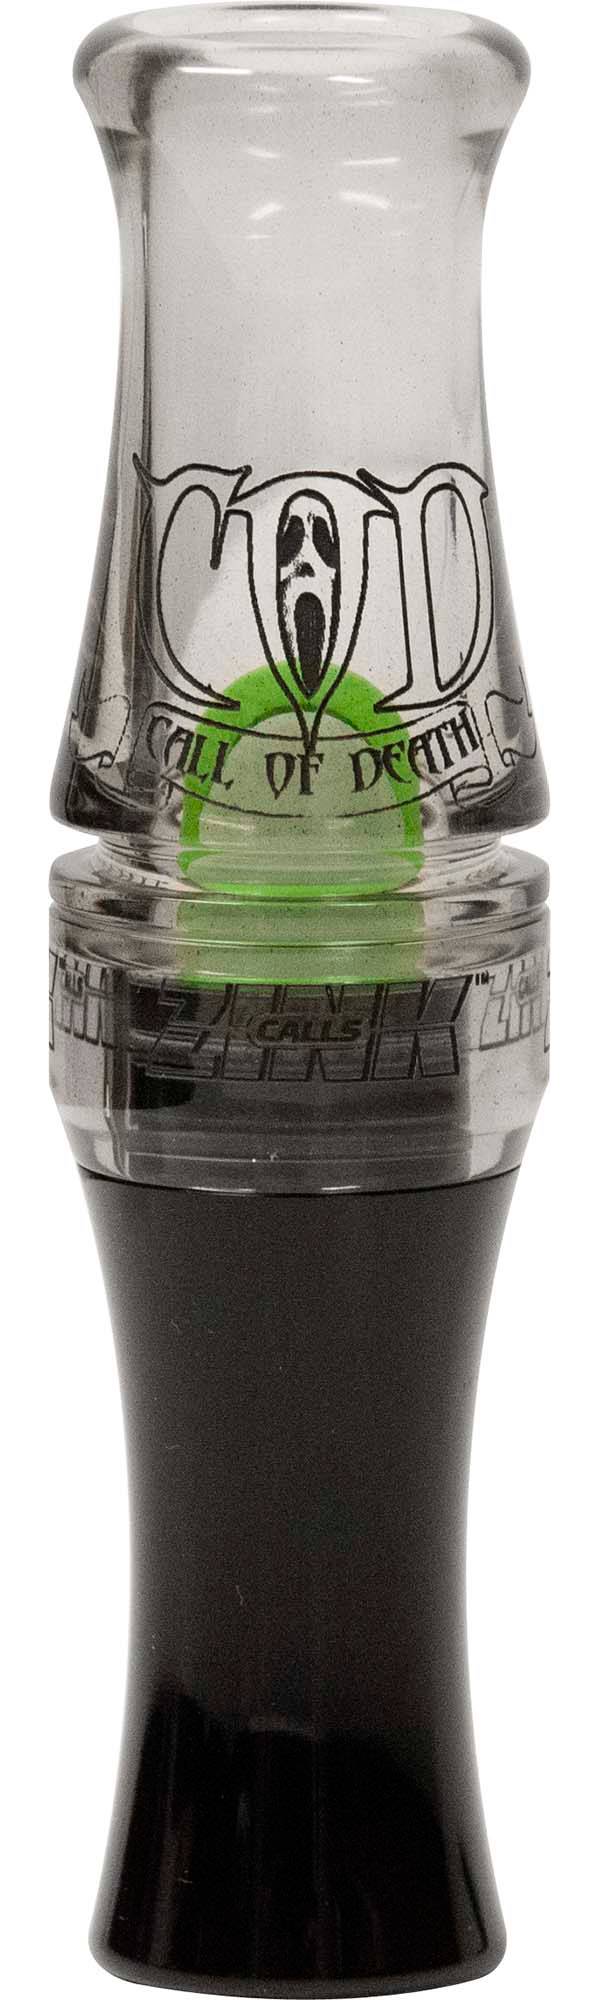 Zink Call of Death Goose Call product image